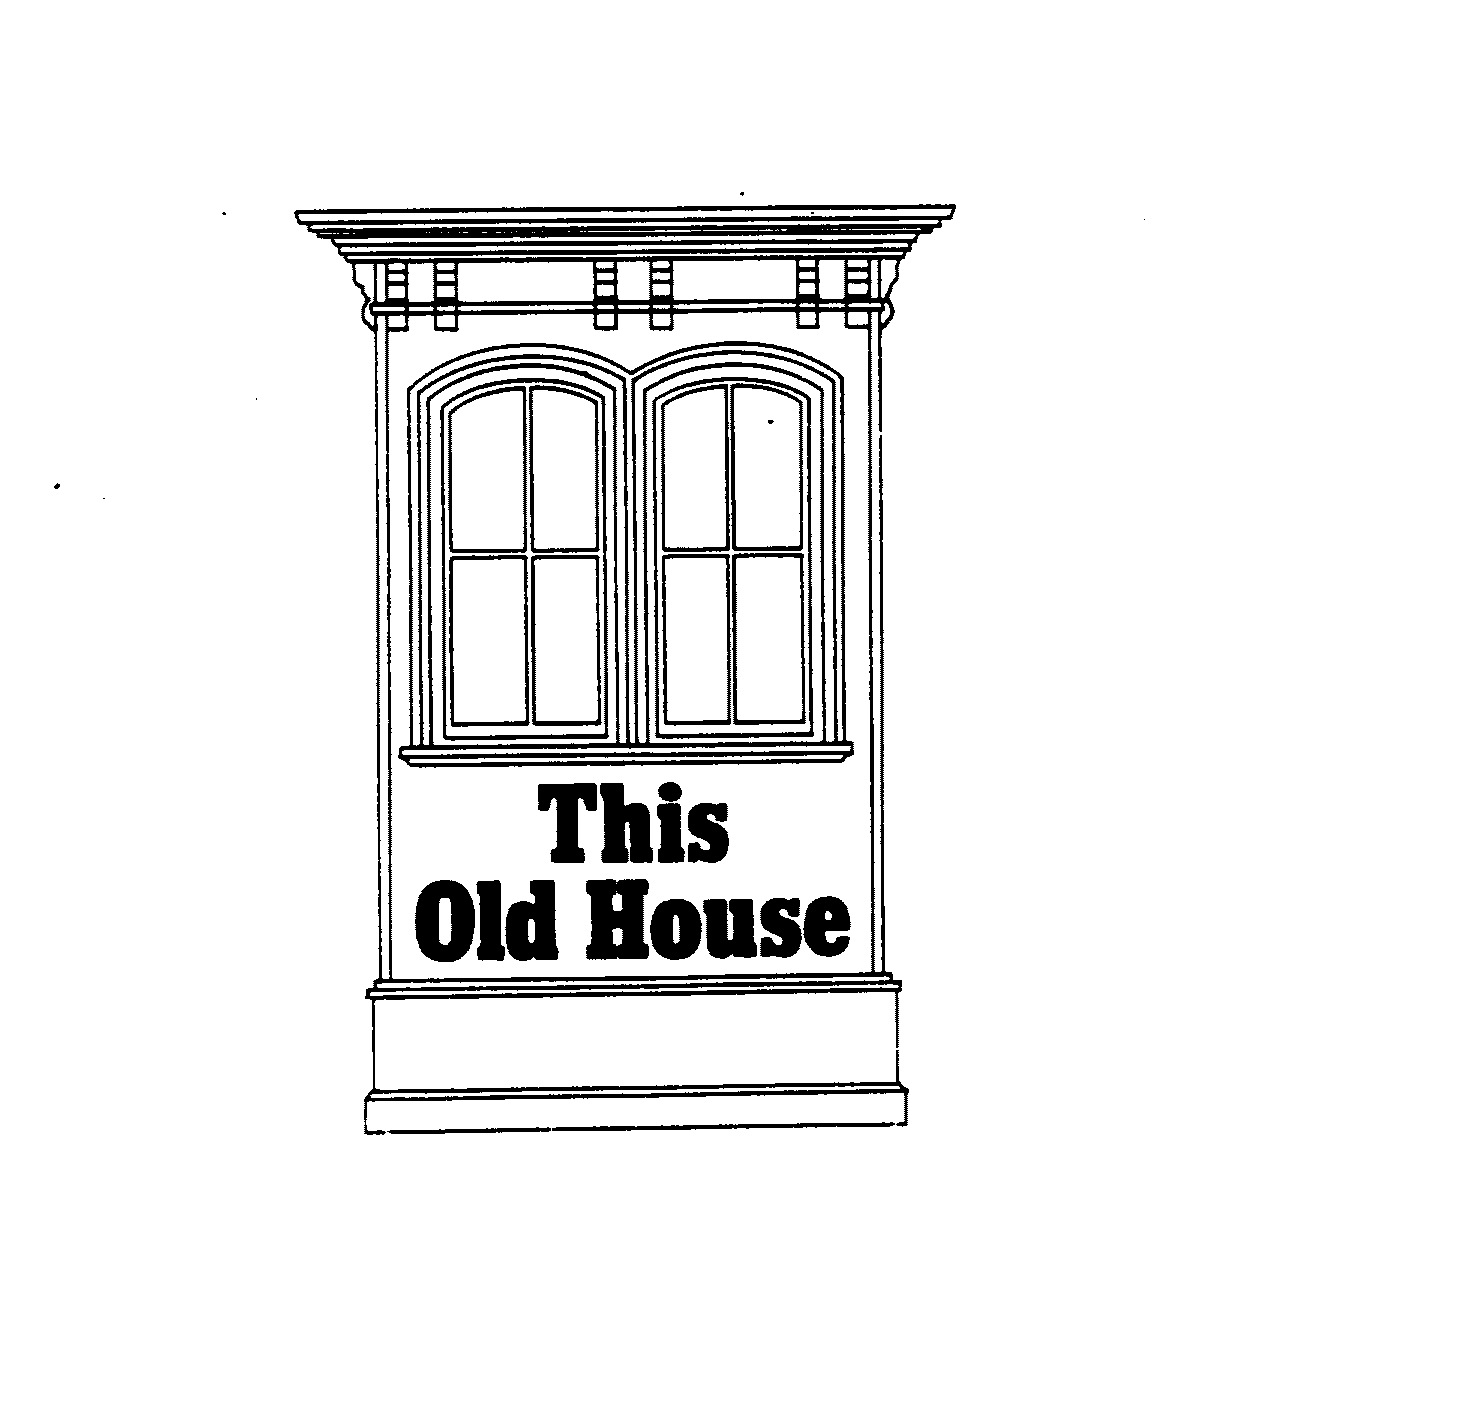  THIS OLD HOUSE